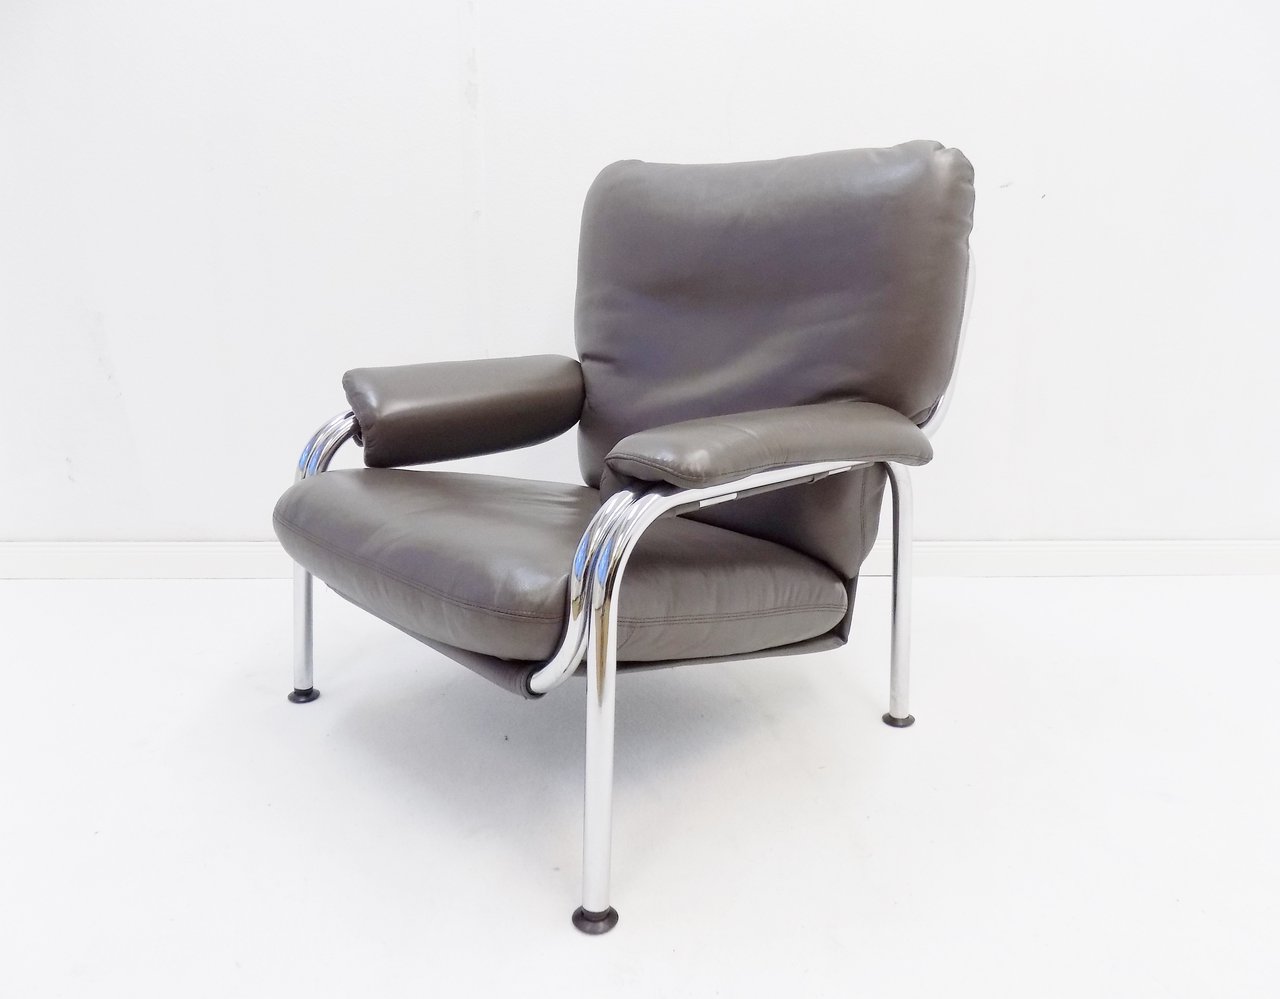 Image 2 of De Sede Kangaroo leather armchair by Hans Eichenberger